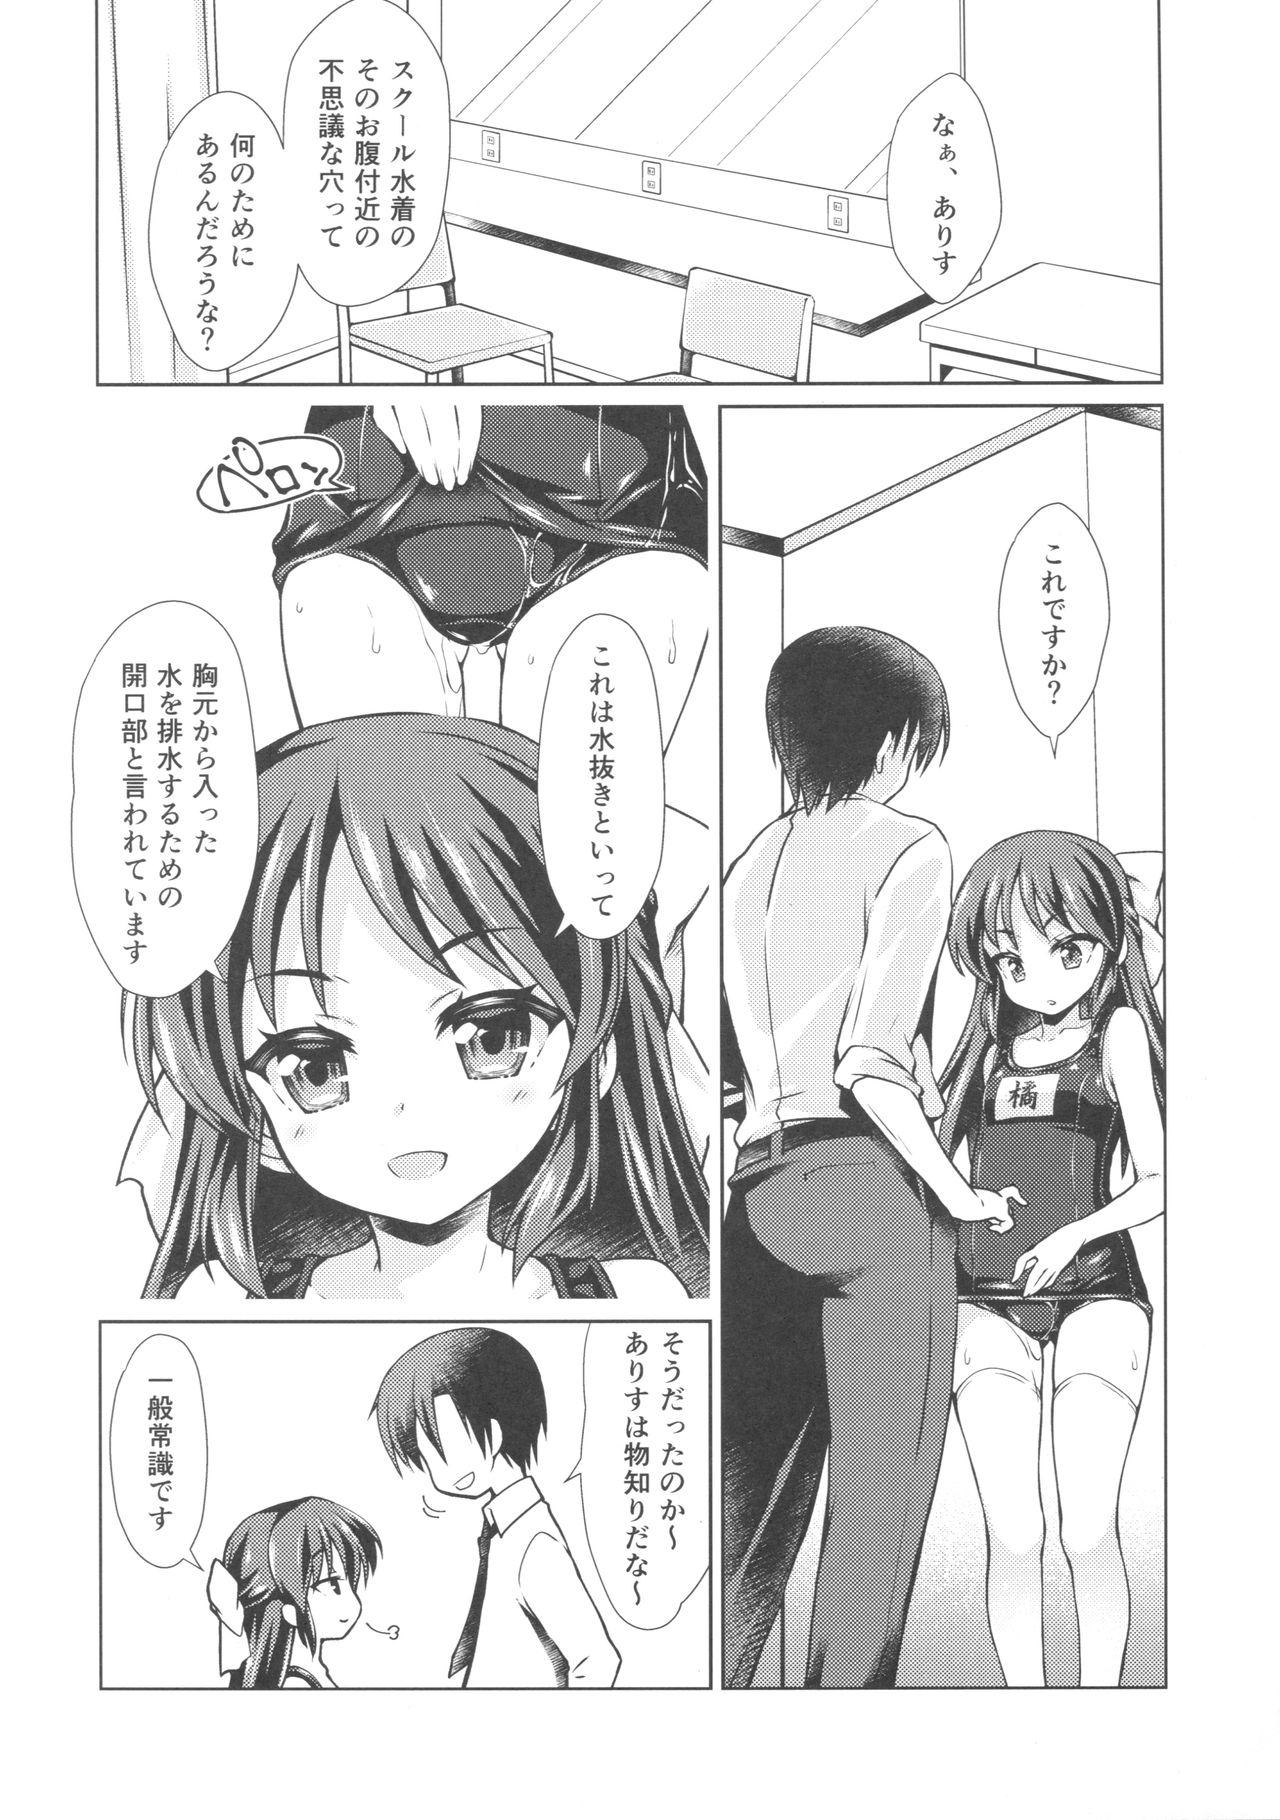 Latin Dere Suku COOL - The idolmaster Firsttime - Page 5